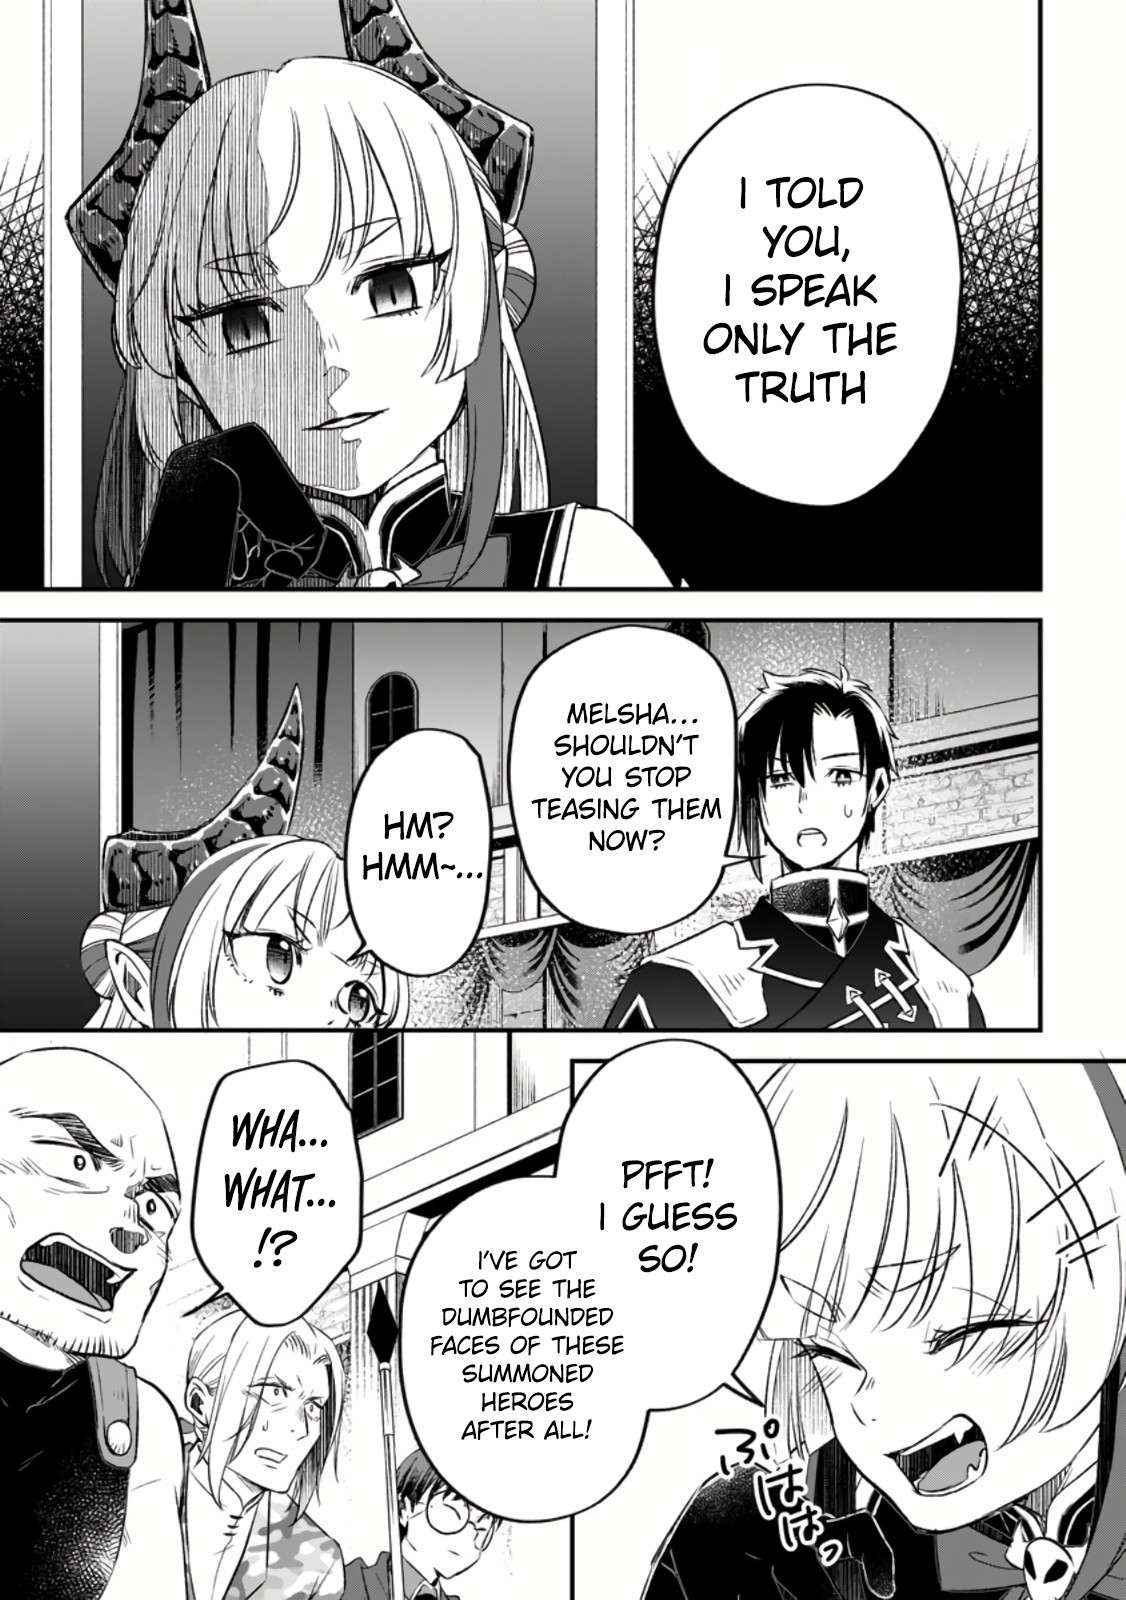 I Was Exiled From The Heroes’ Party So I Tried Raising The Demon Lord To Be Unbelievably Strong - 11 page 9-565c19e5